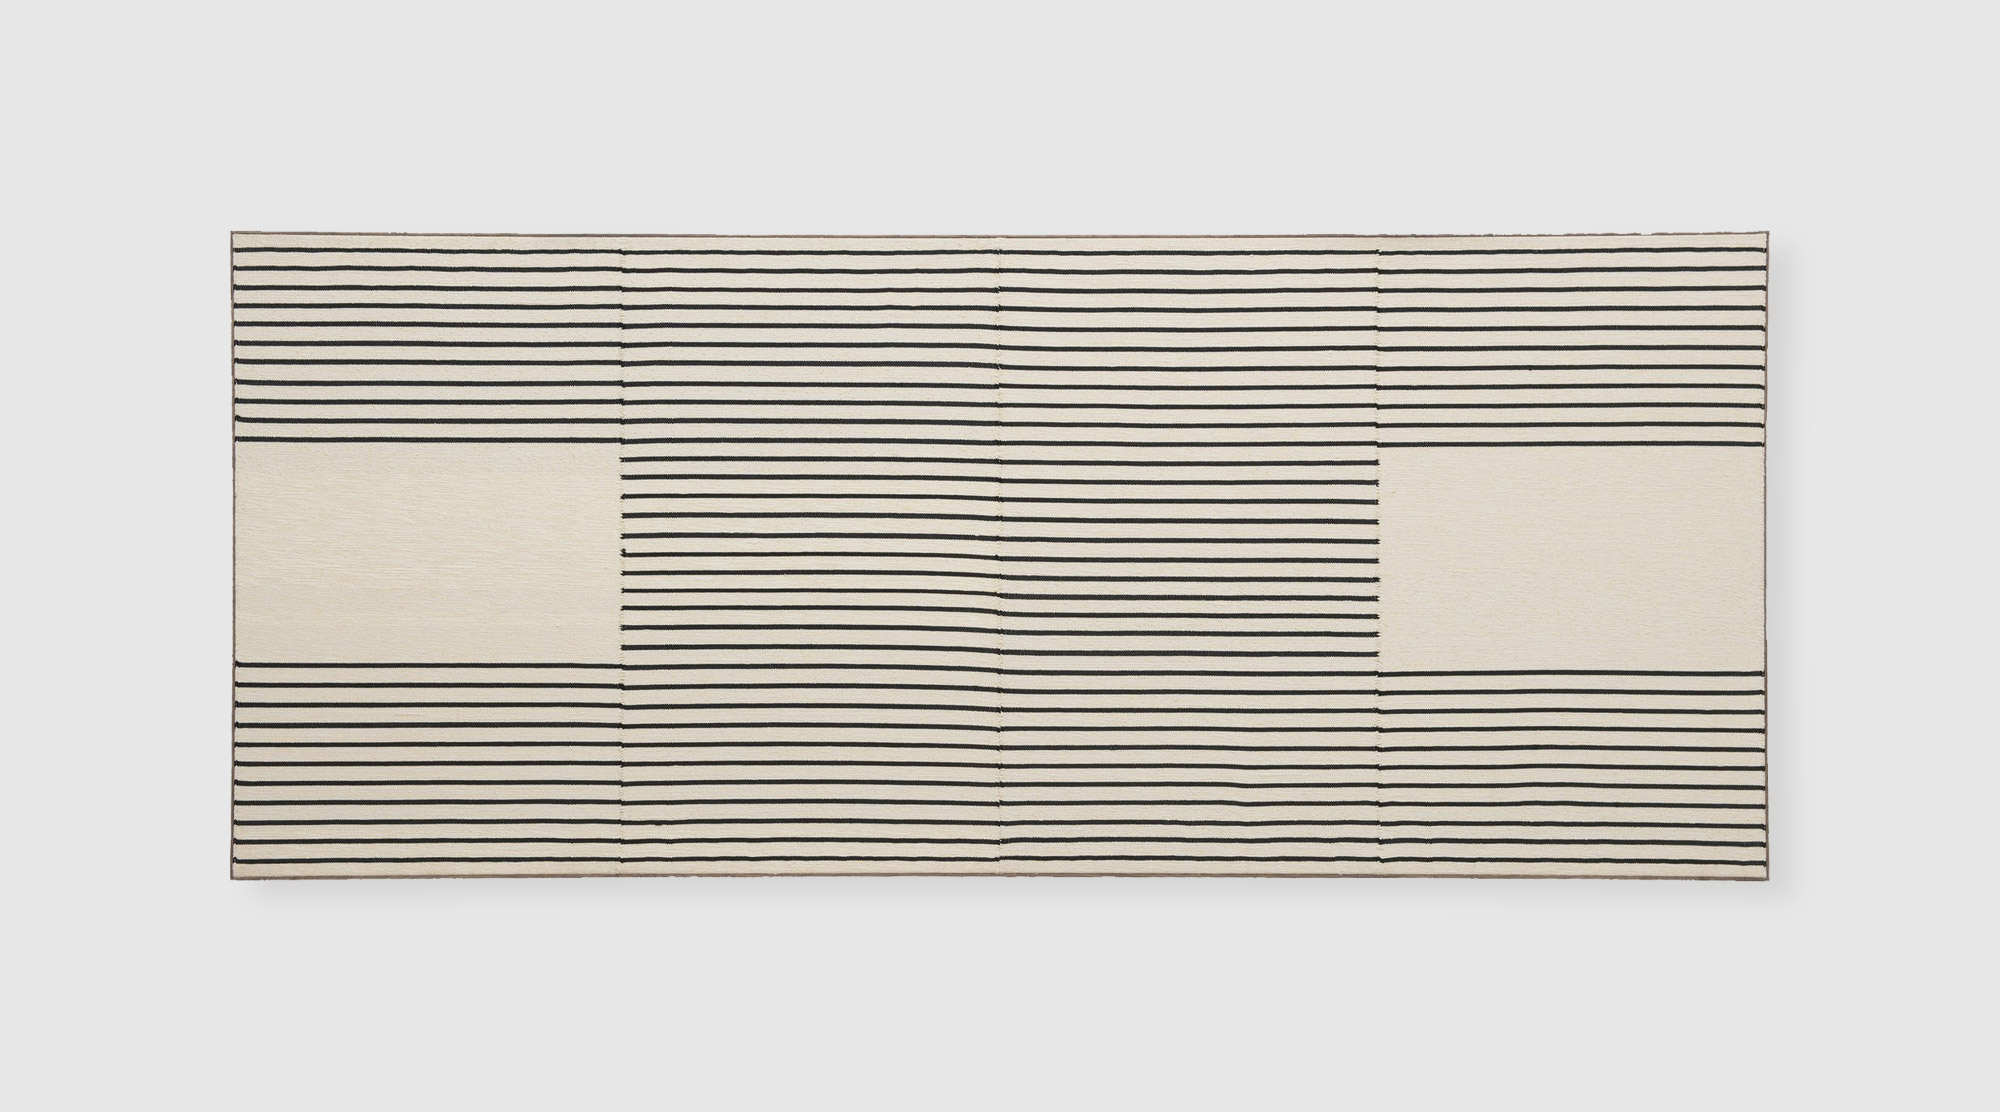 Brent Wadden, Untitled, 2018, handwoven fibers, wool, cotton and acrylic on canvas, 157 cm × 372 cm × 4 cm © Brent Wadden via Pace Gallery